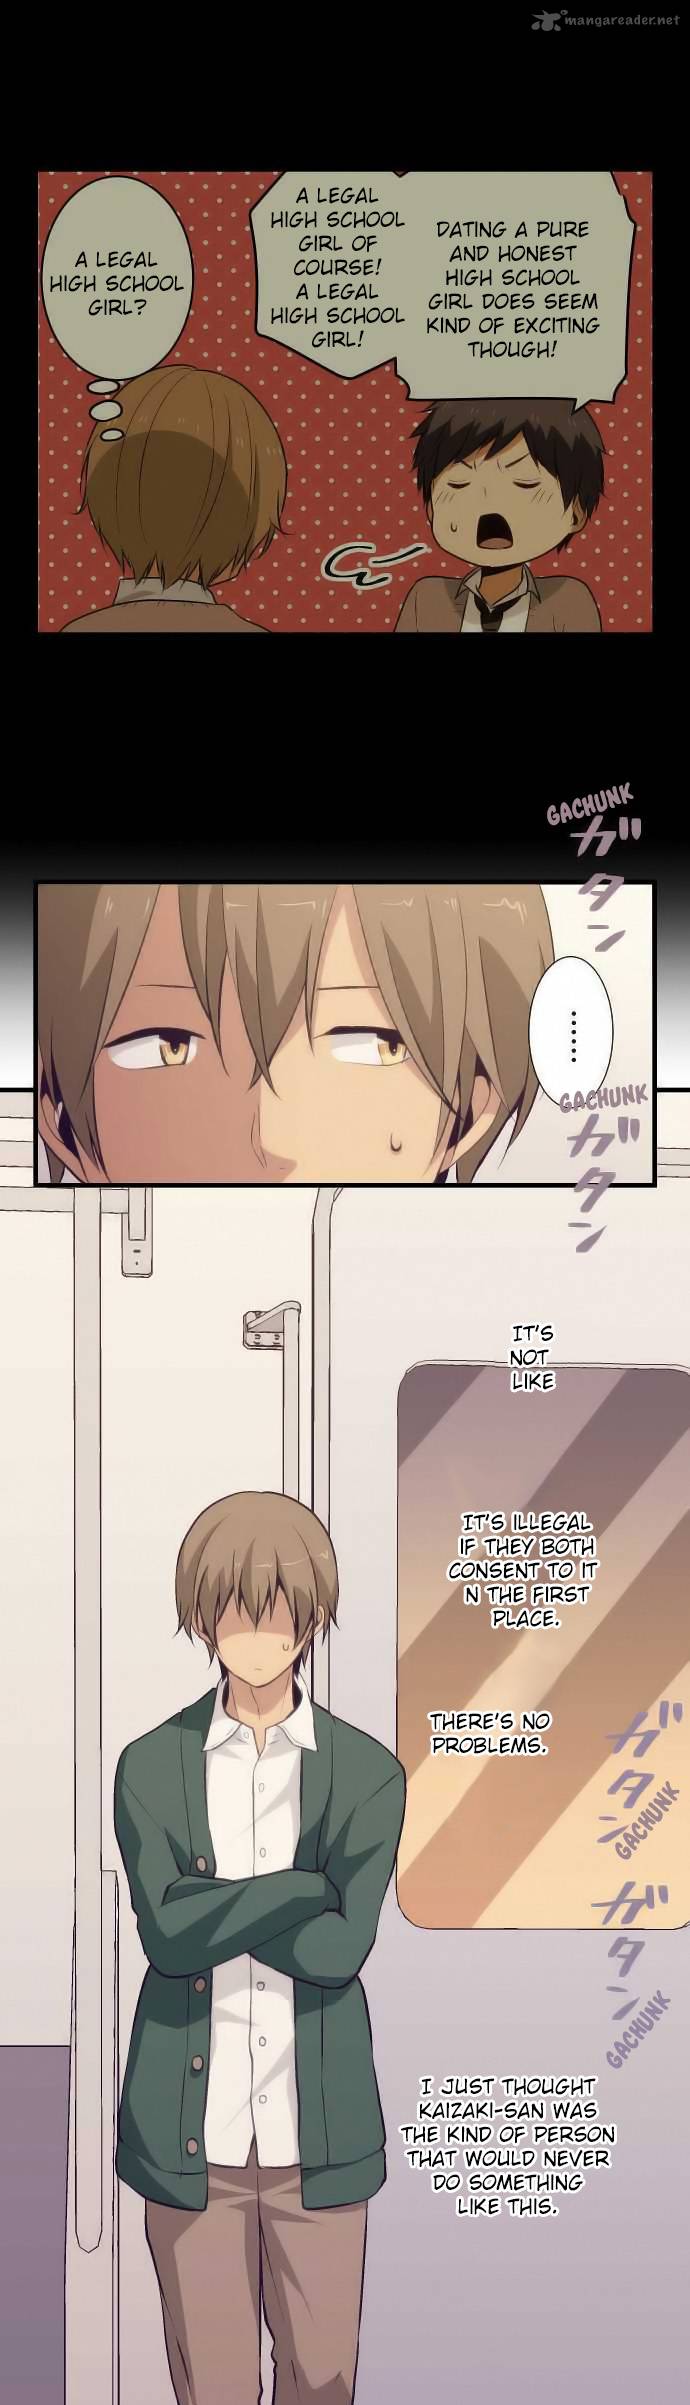 Relife 51 1